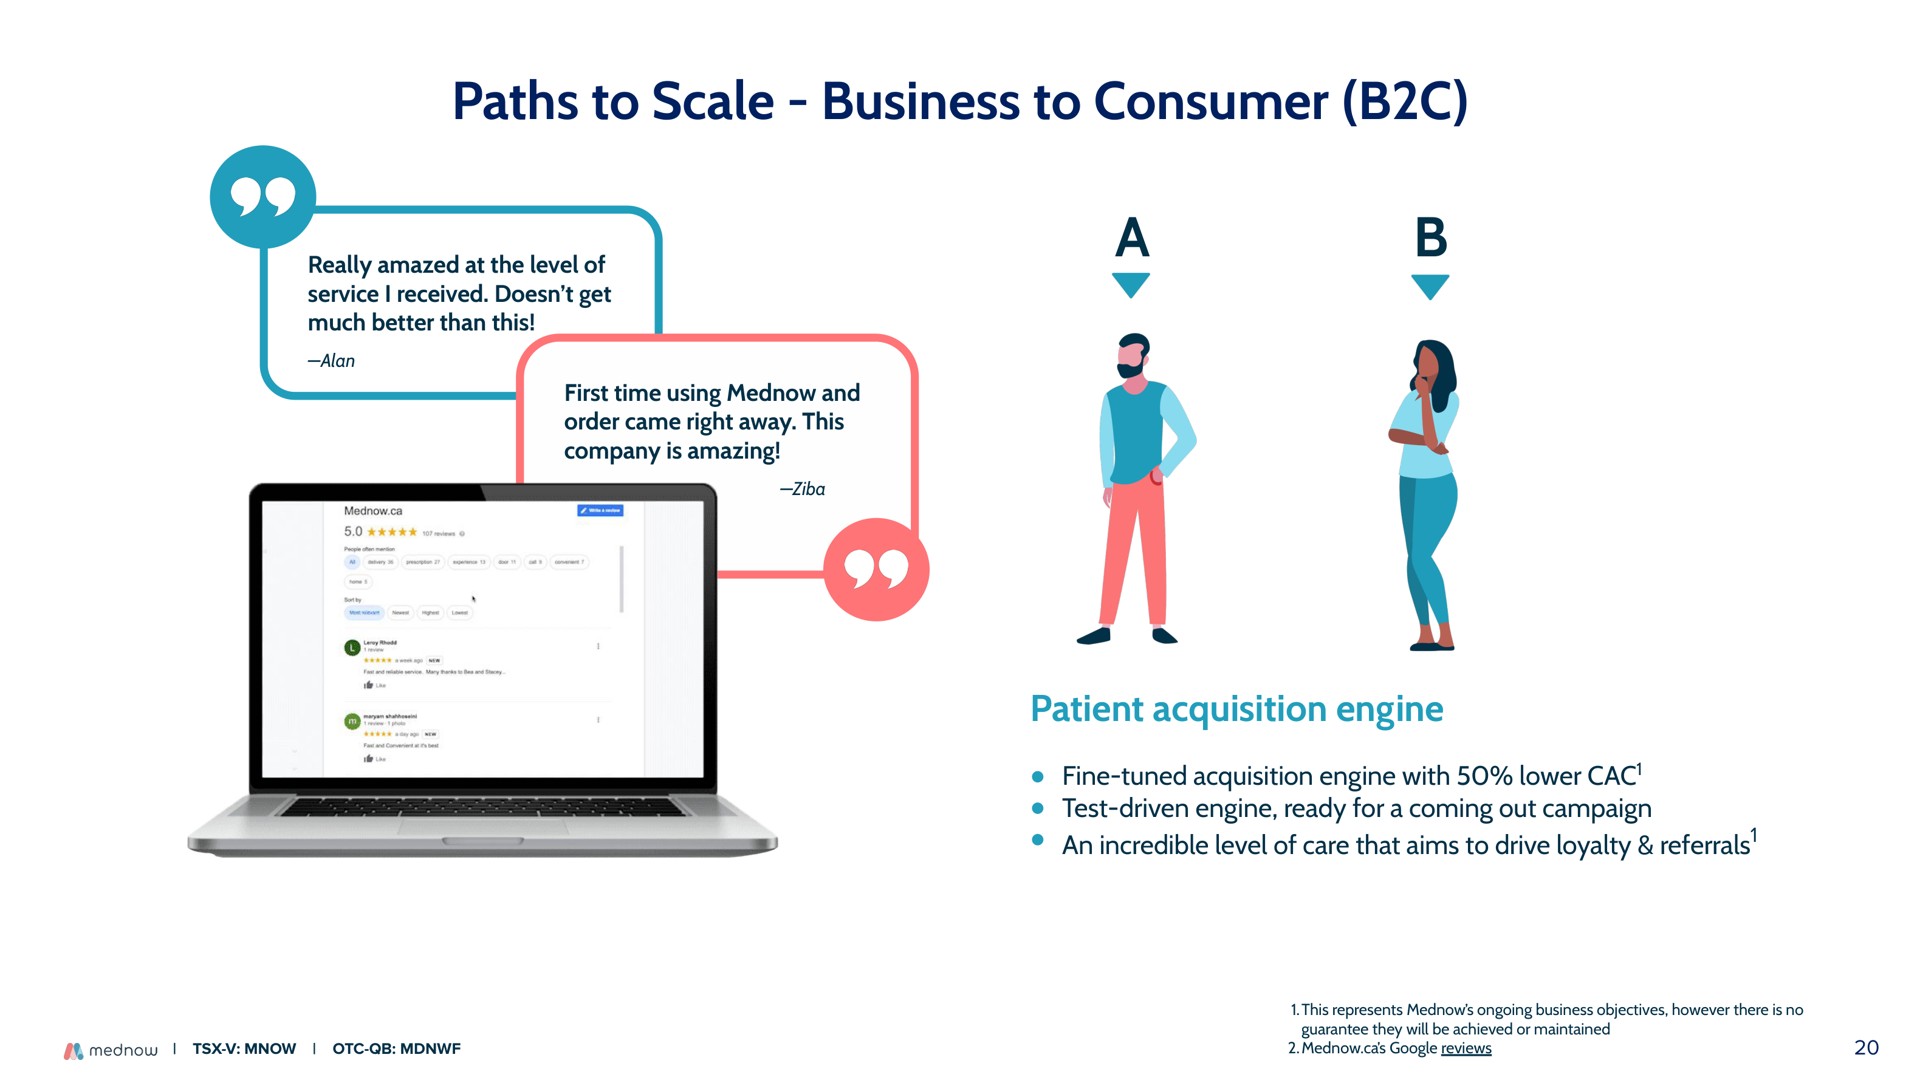 paths to scale business to consumer a | Mednow